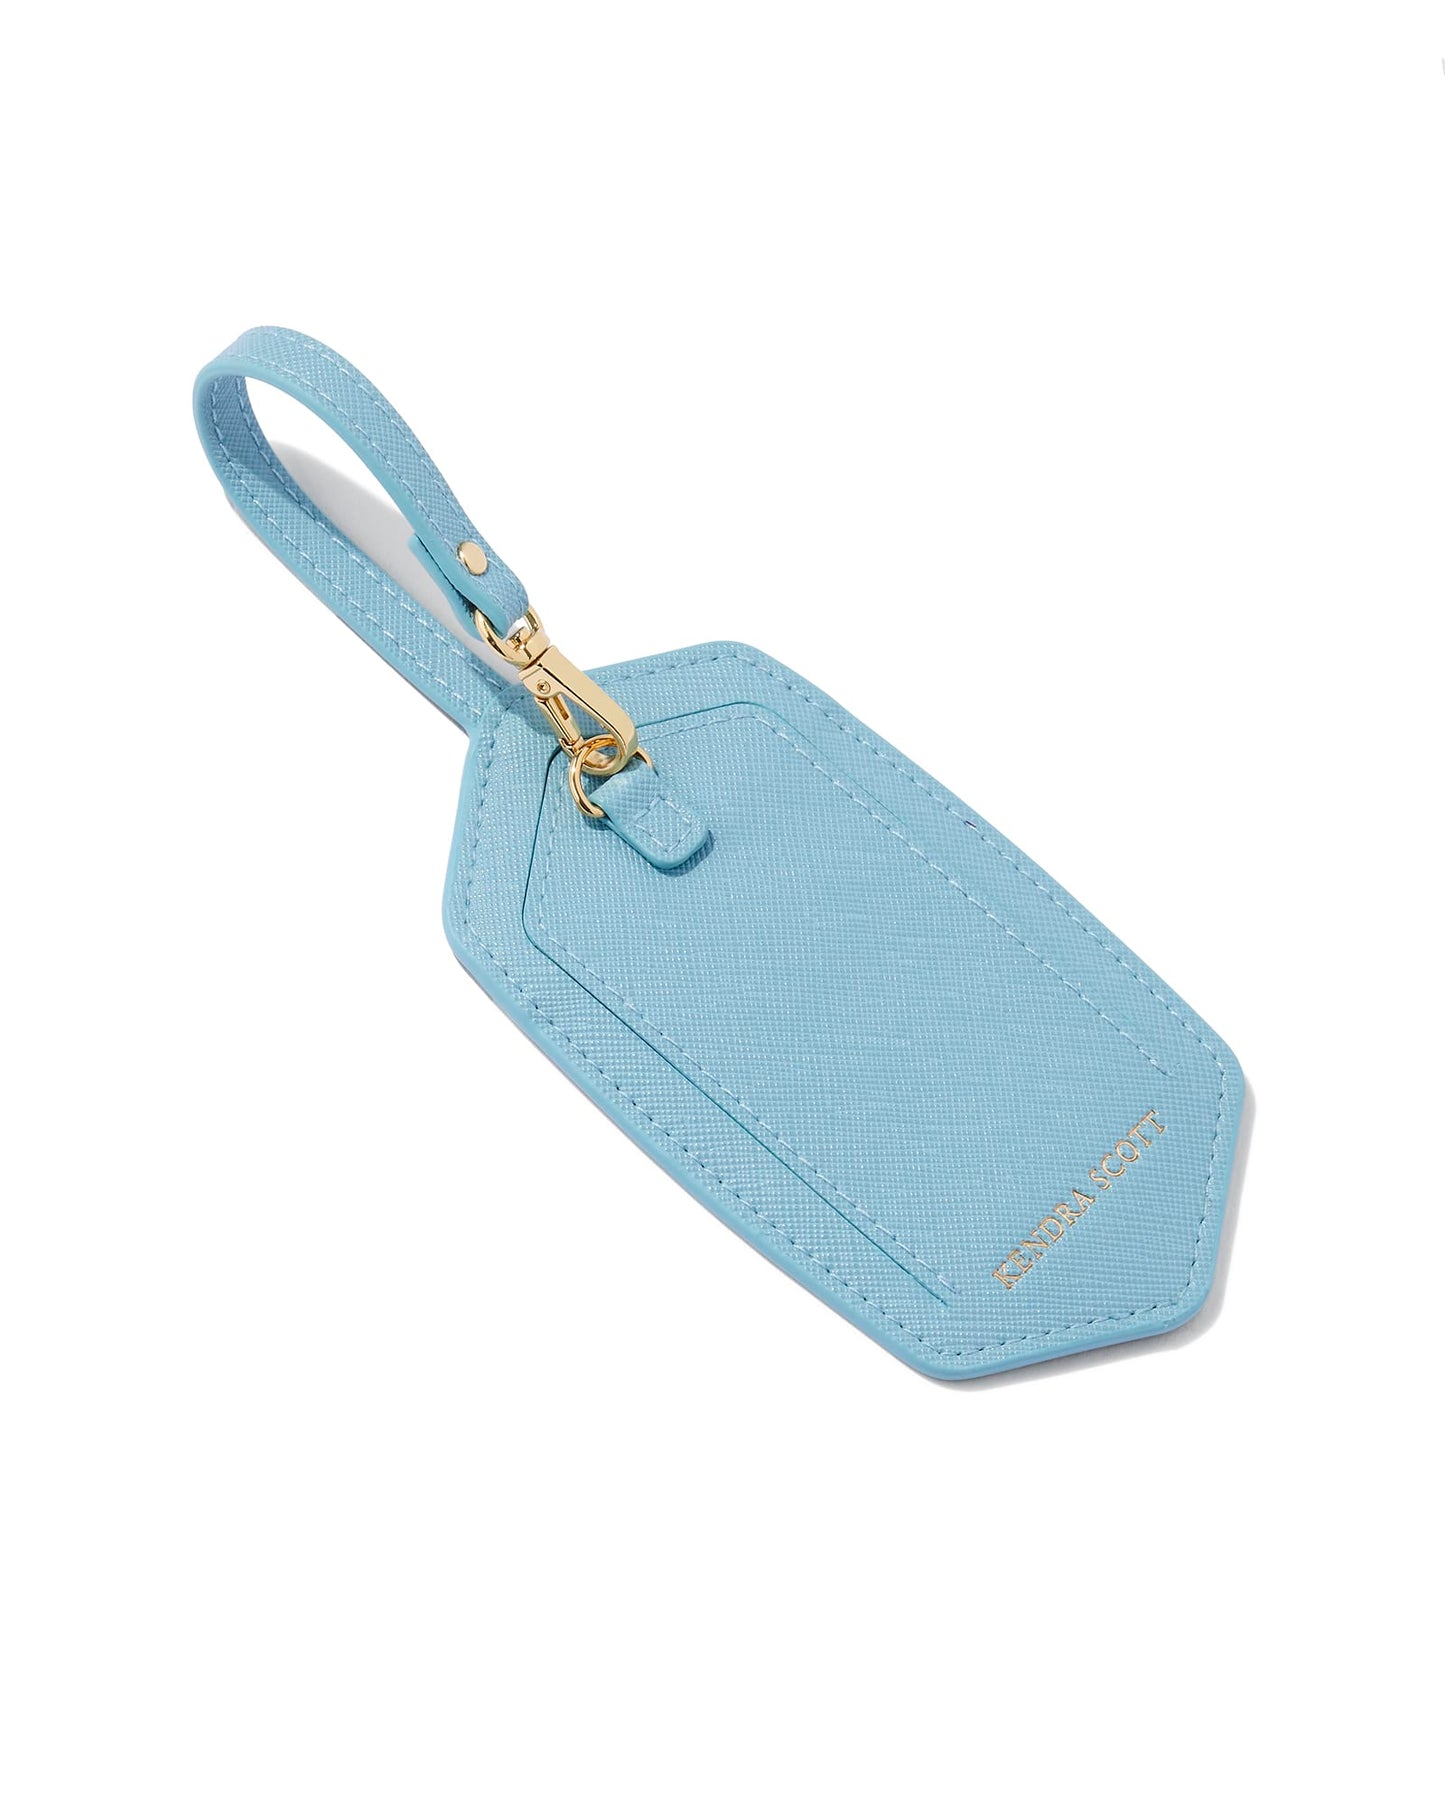 Light blue luggage tag 2.5" X 5.11" (10.4" with strap)